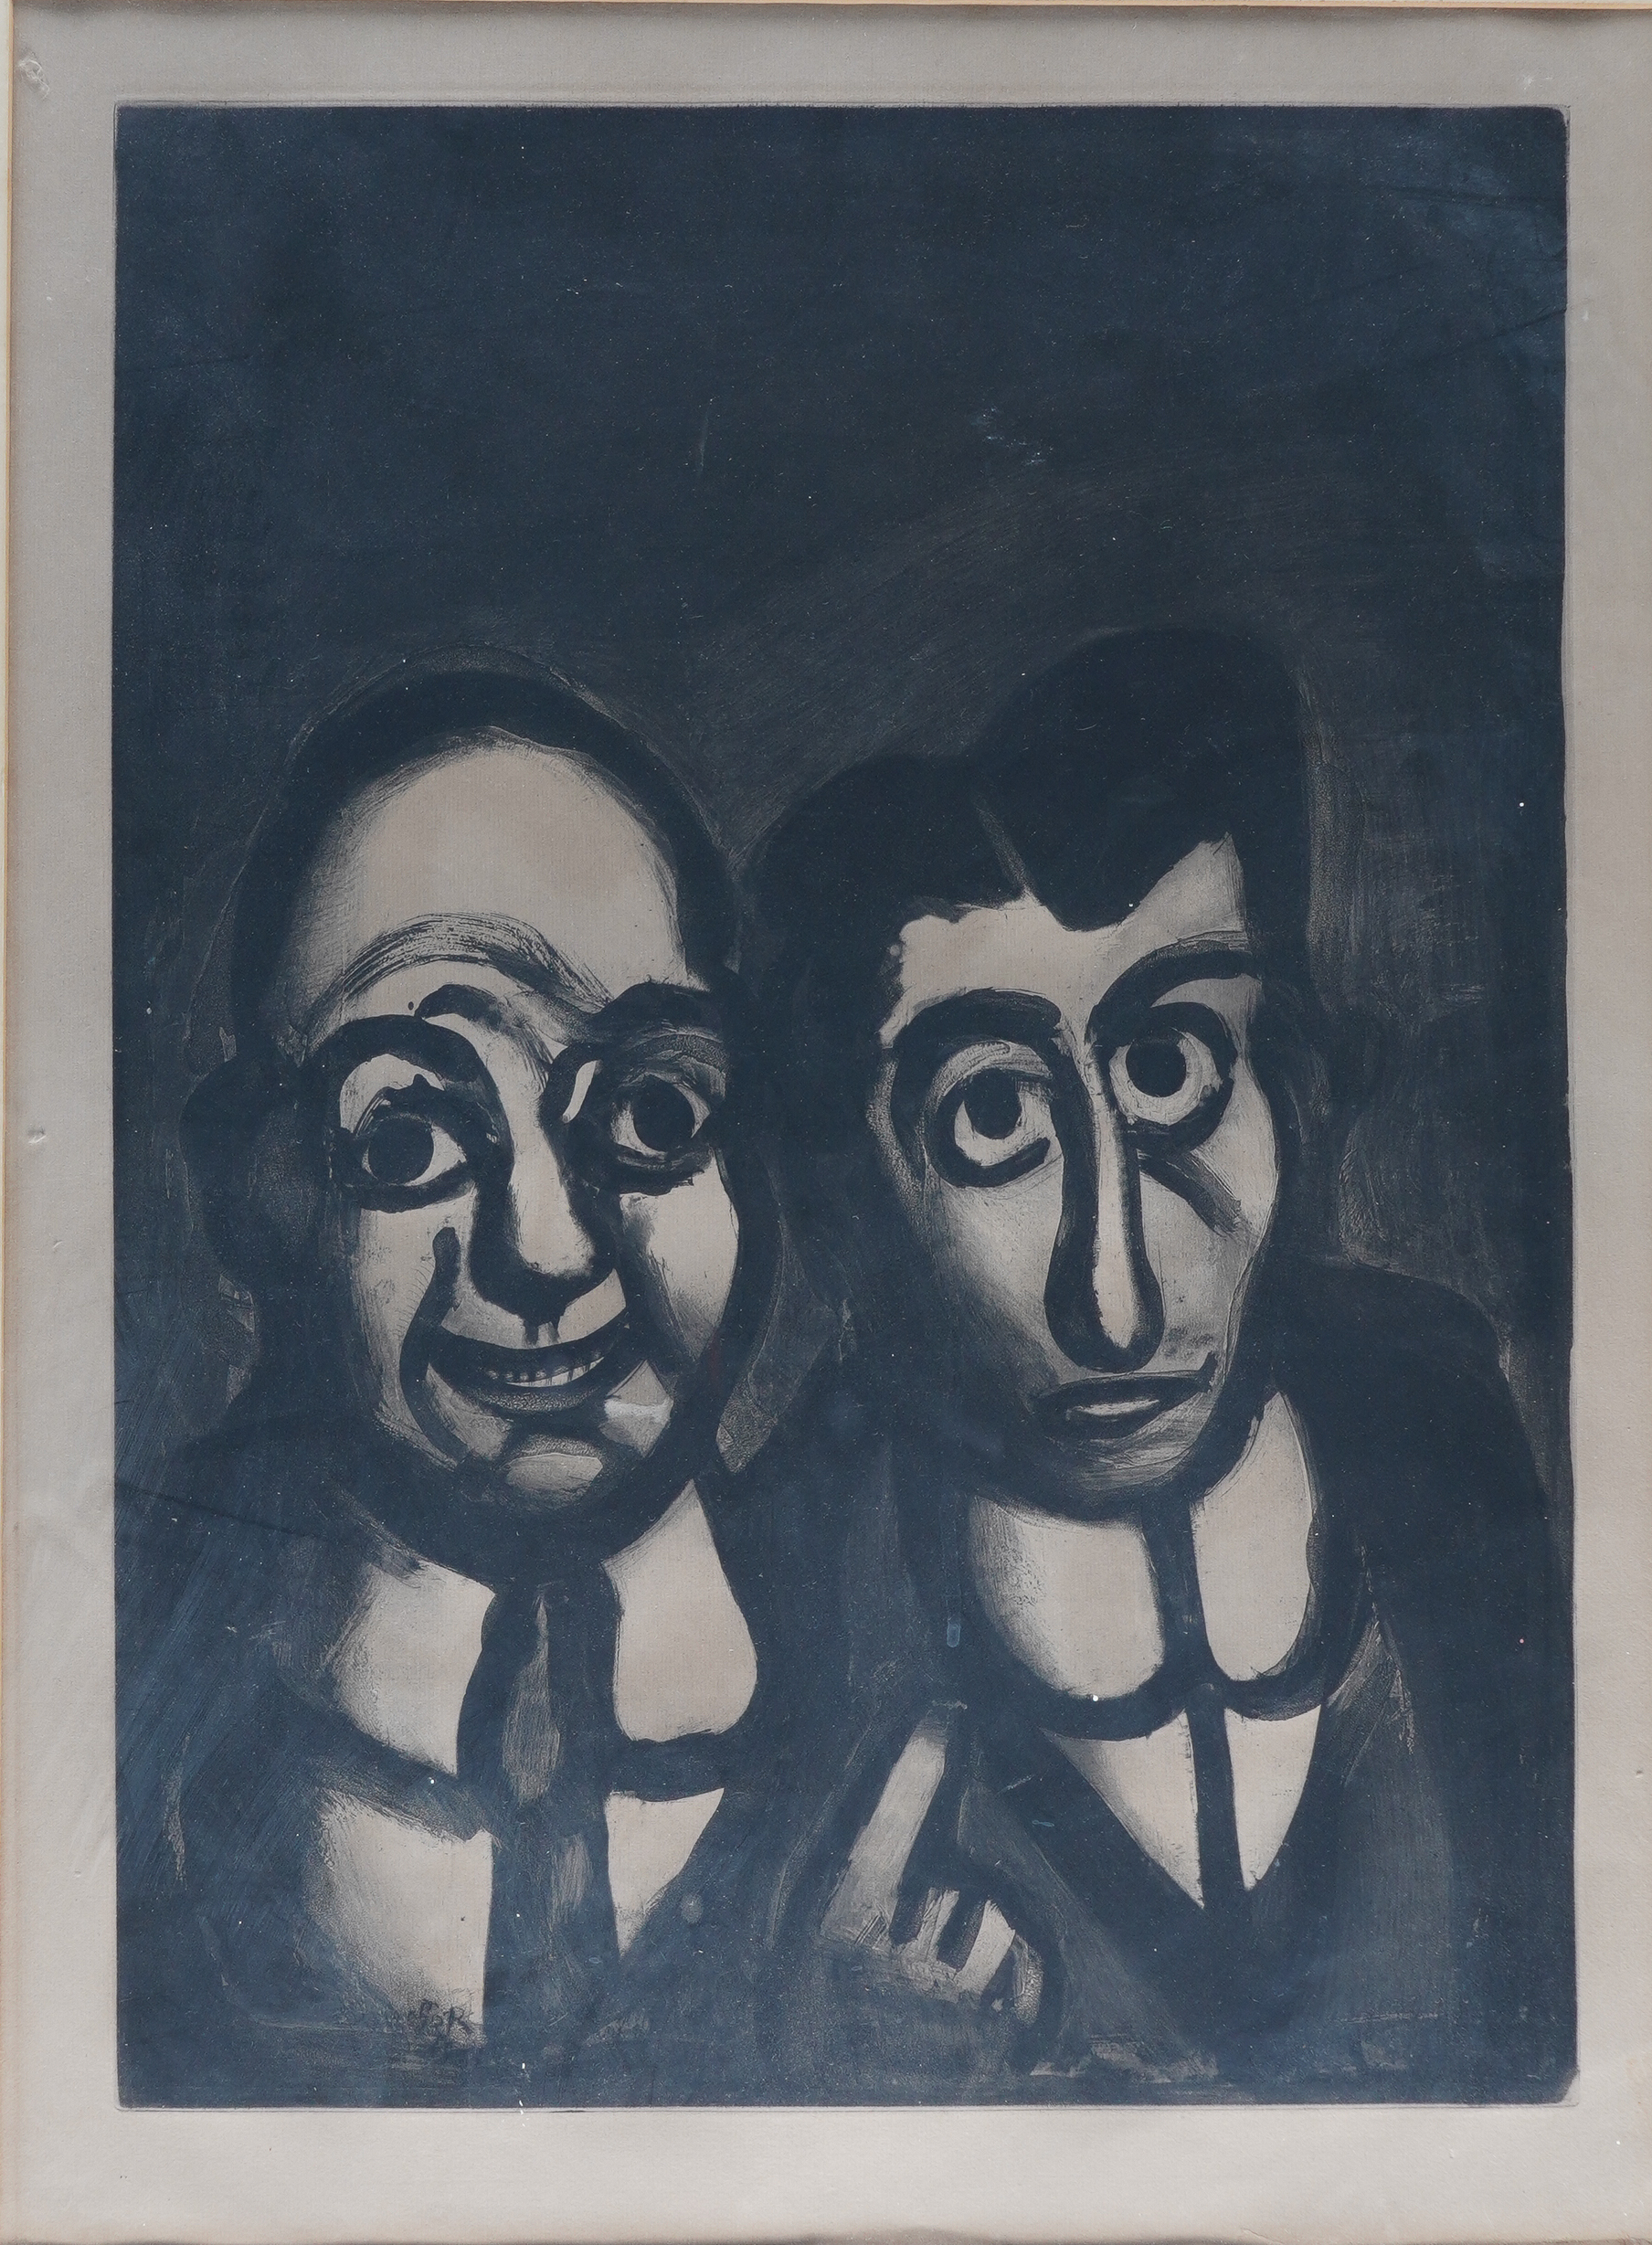 20TH CENTURY Untitled, Man and woman